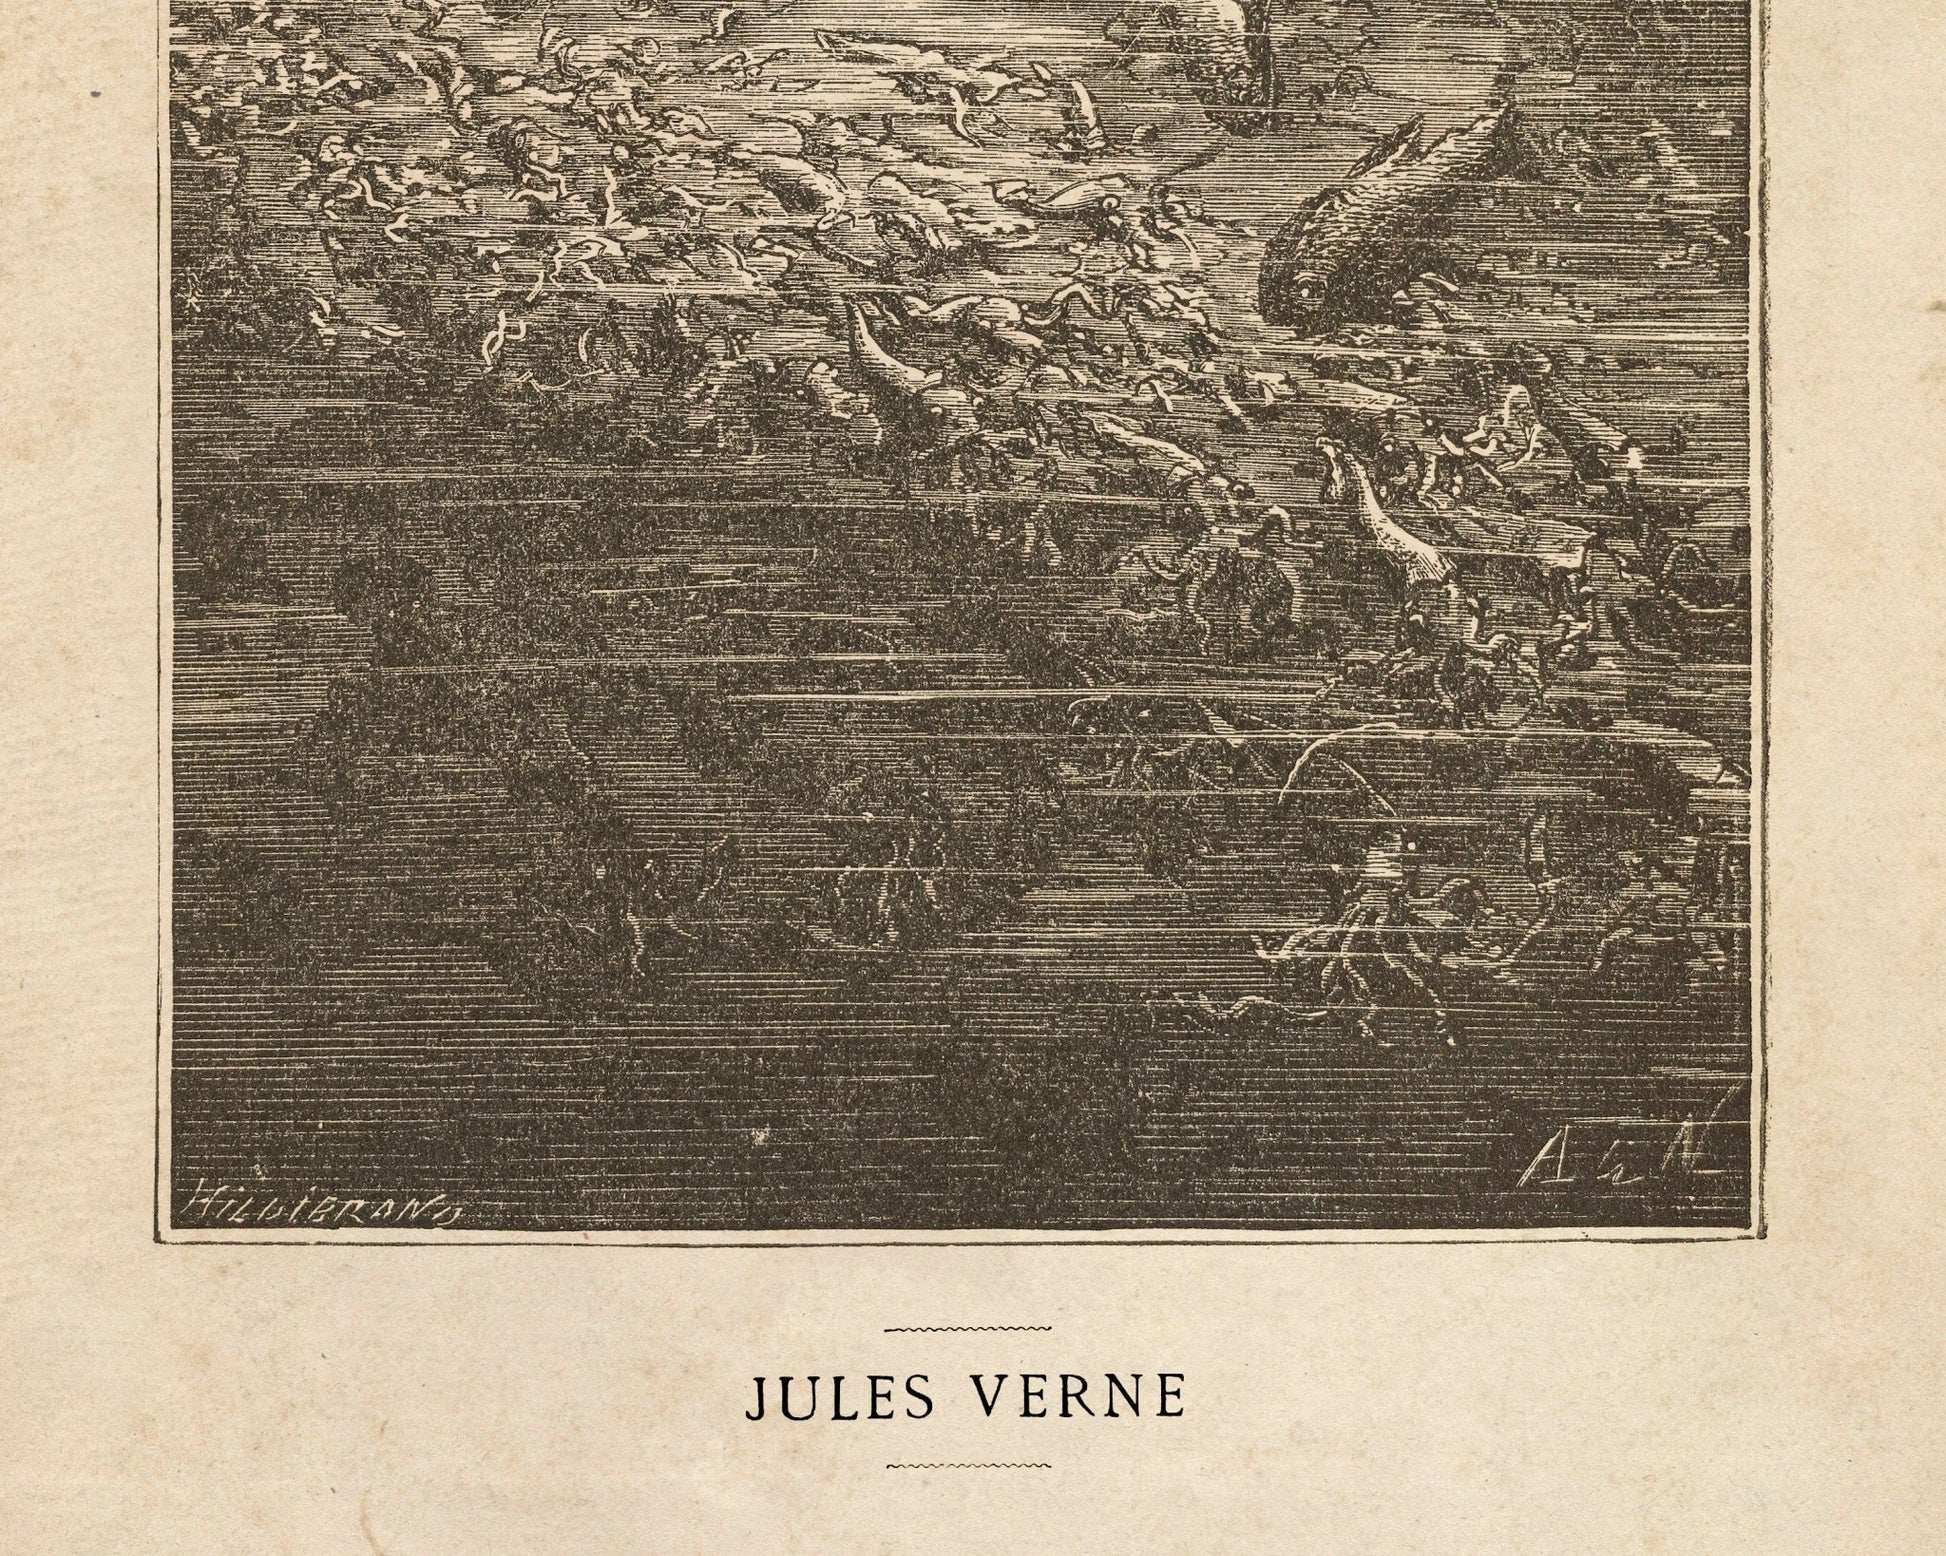 Édouard Riou "The Nautilus" (c.1870) from "Twenty Thousand Leagues Under the Seas" by Jules Verne - Mabon Gallery